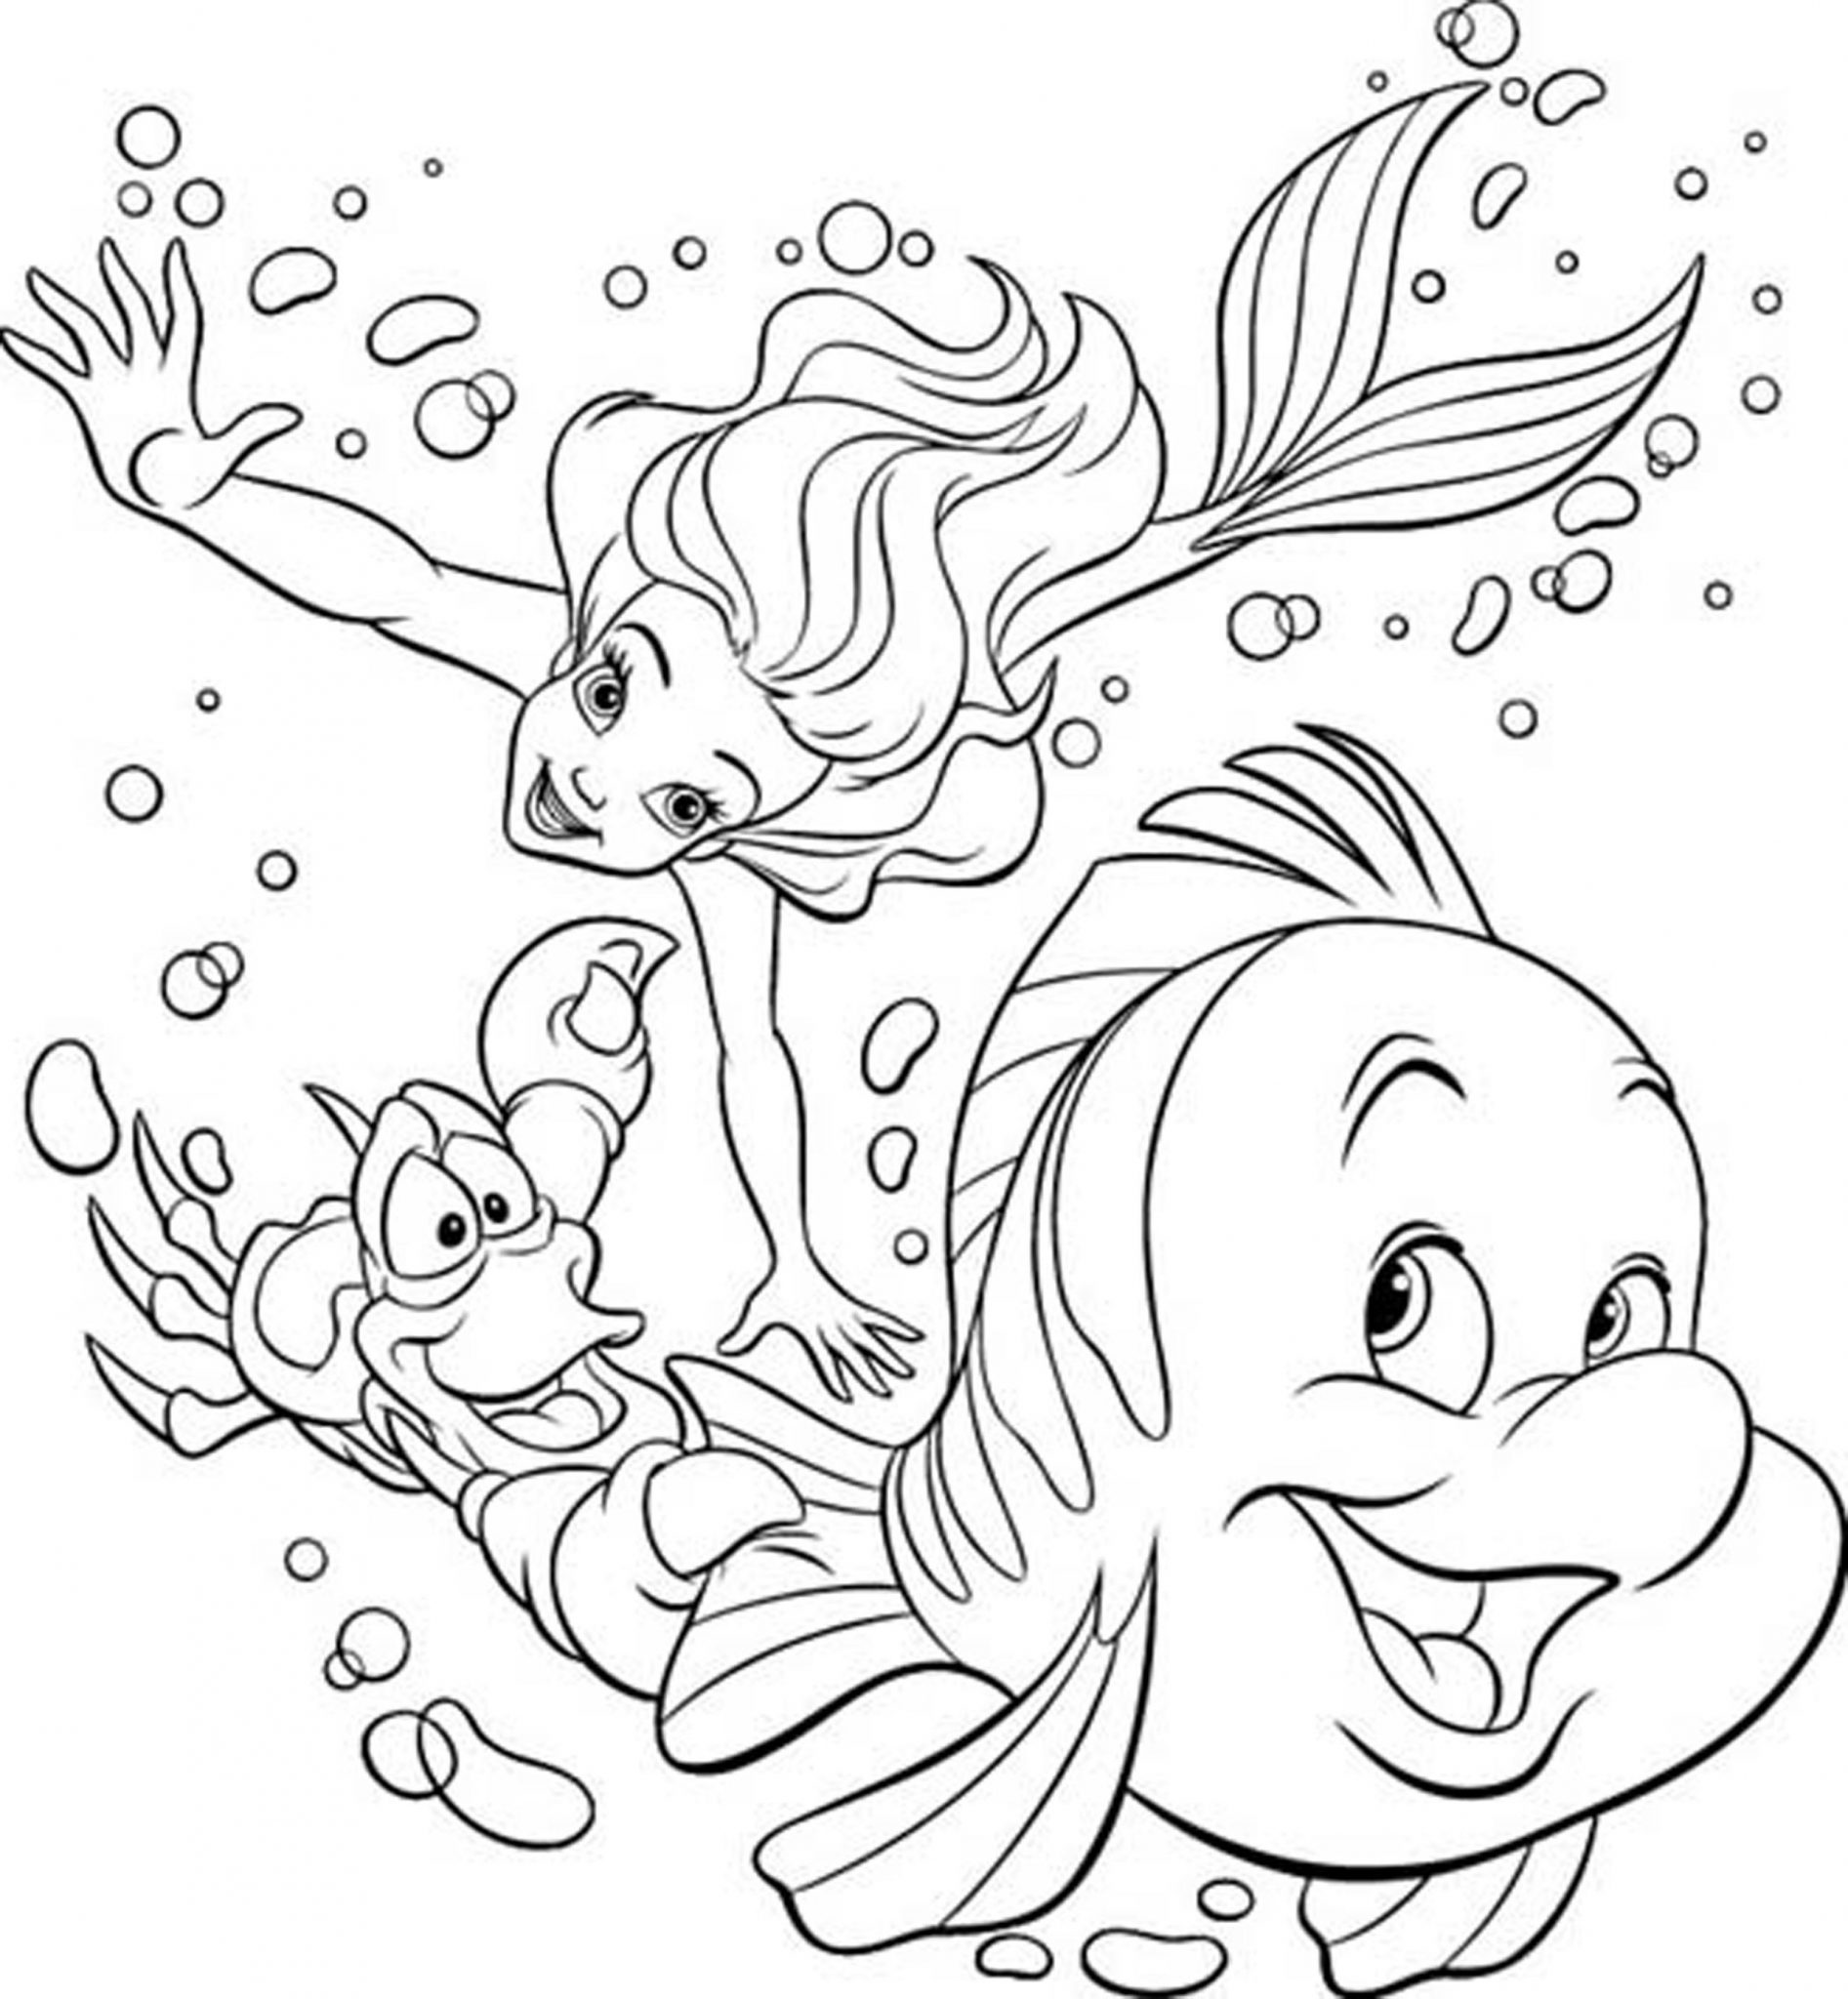 Download 33 Free Disney Coloring Pages for Kids! | BAPS